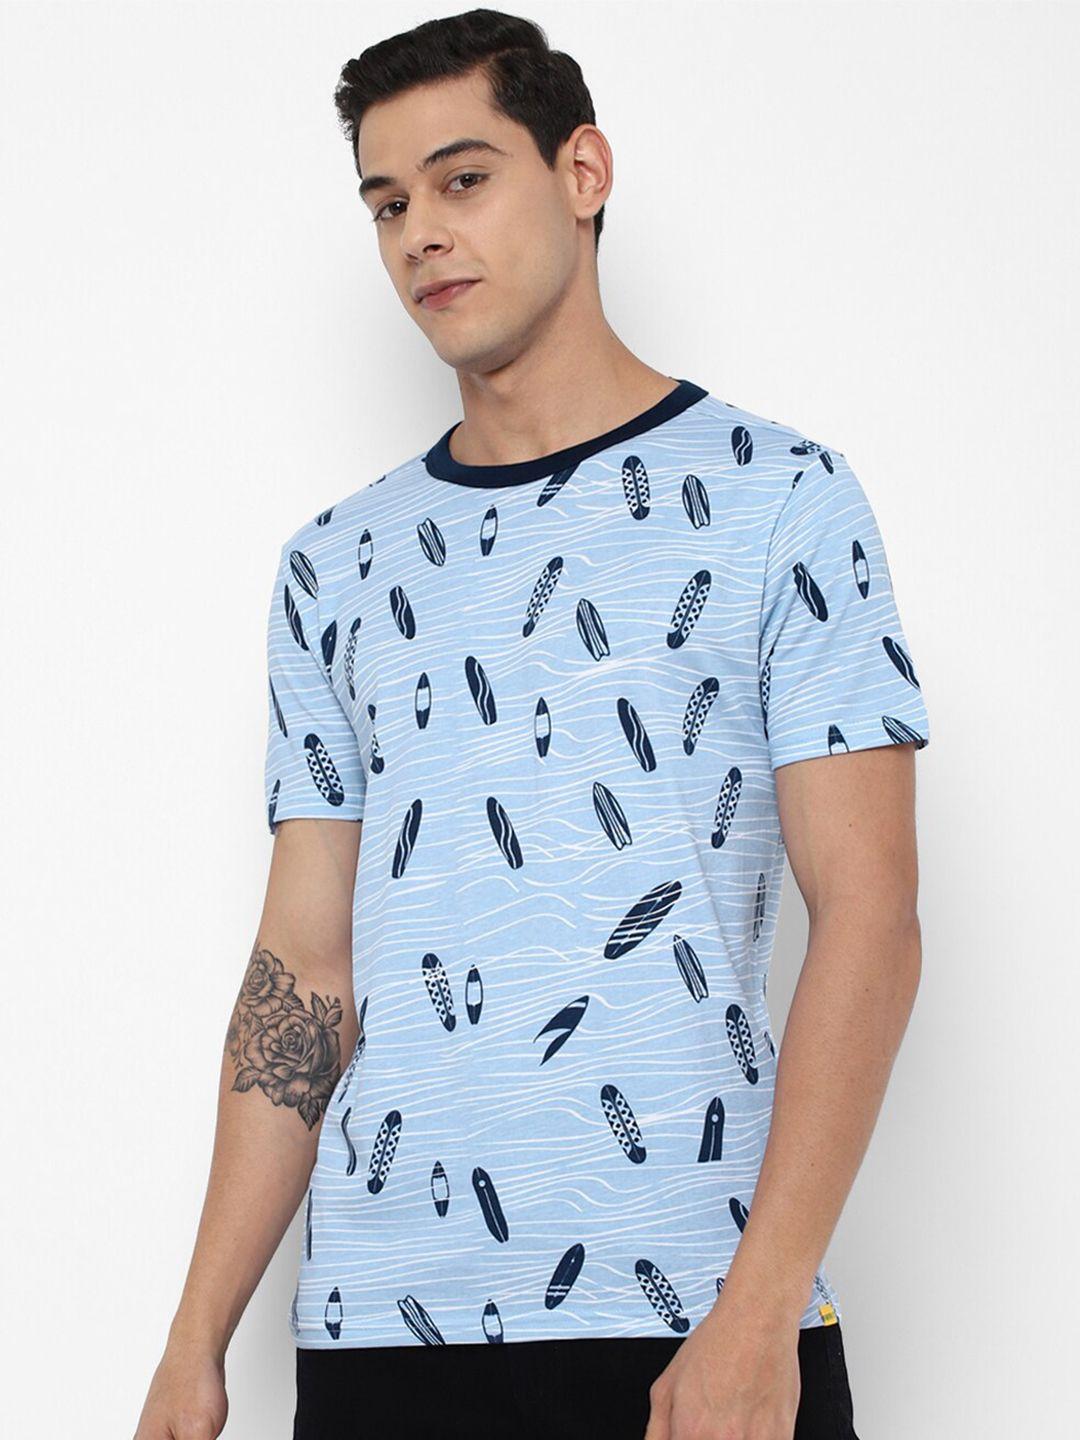 forever-21-men-blue-printed-pure-cotton-t-shirt